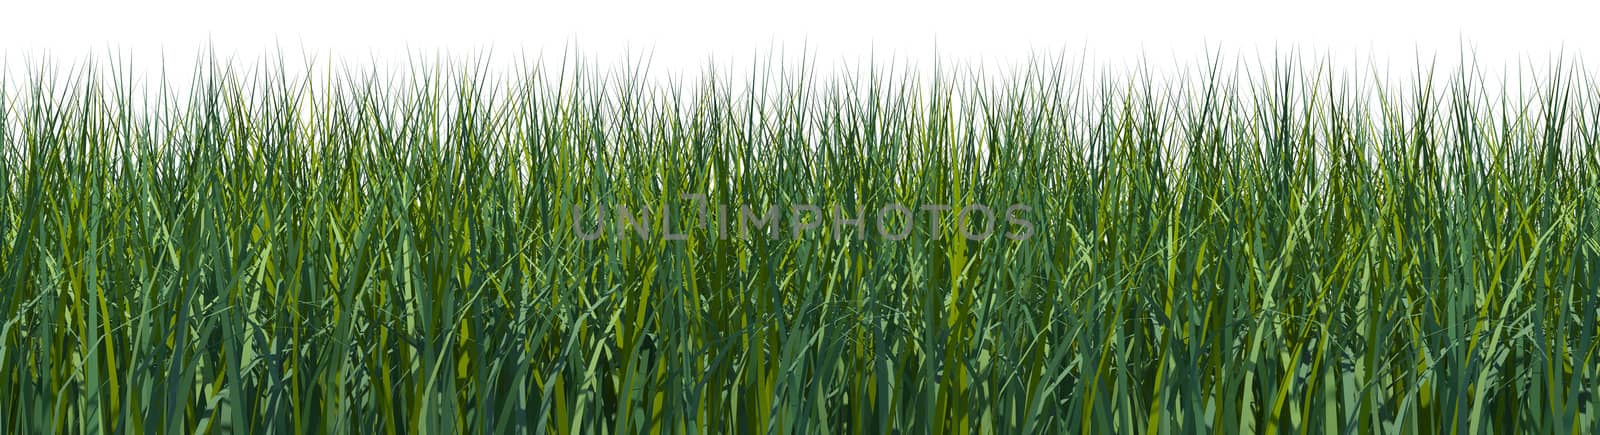 Wide front view on an isolated grass field